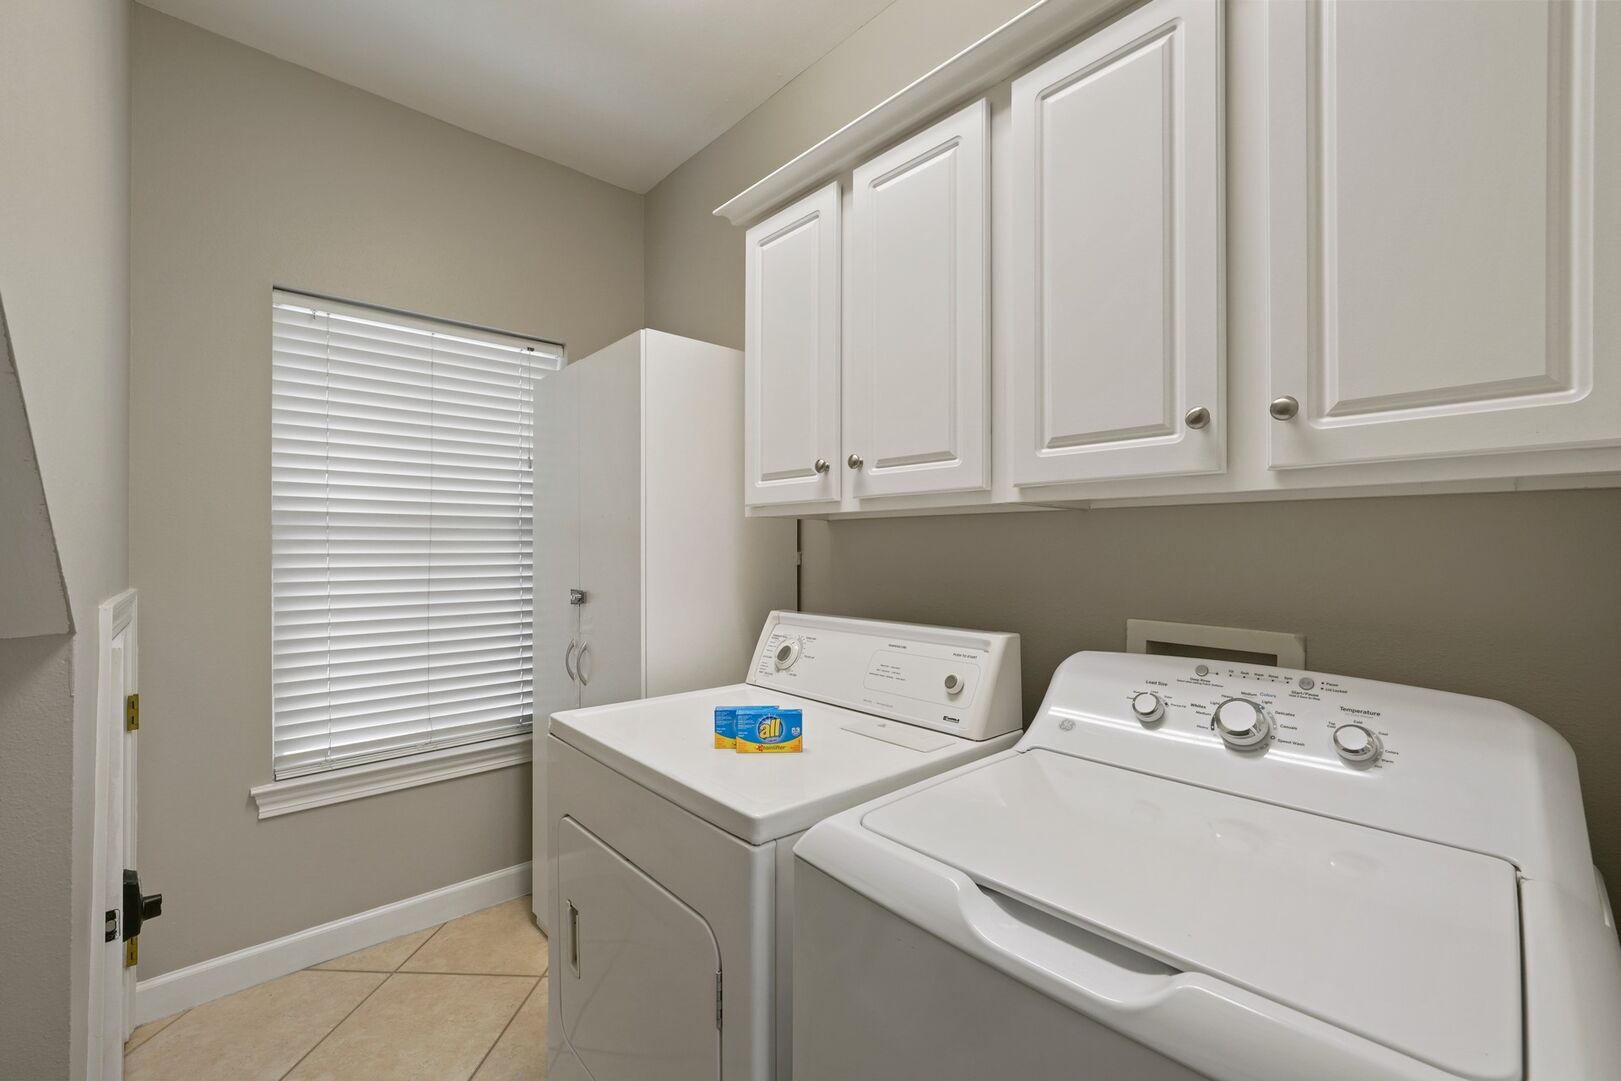 Laundry room (3 bedroom home)